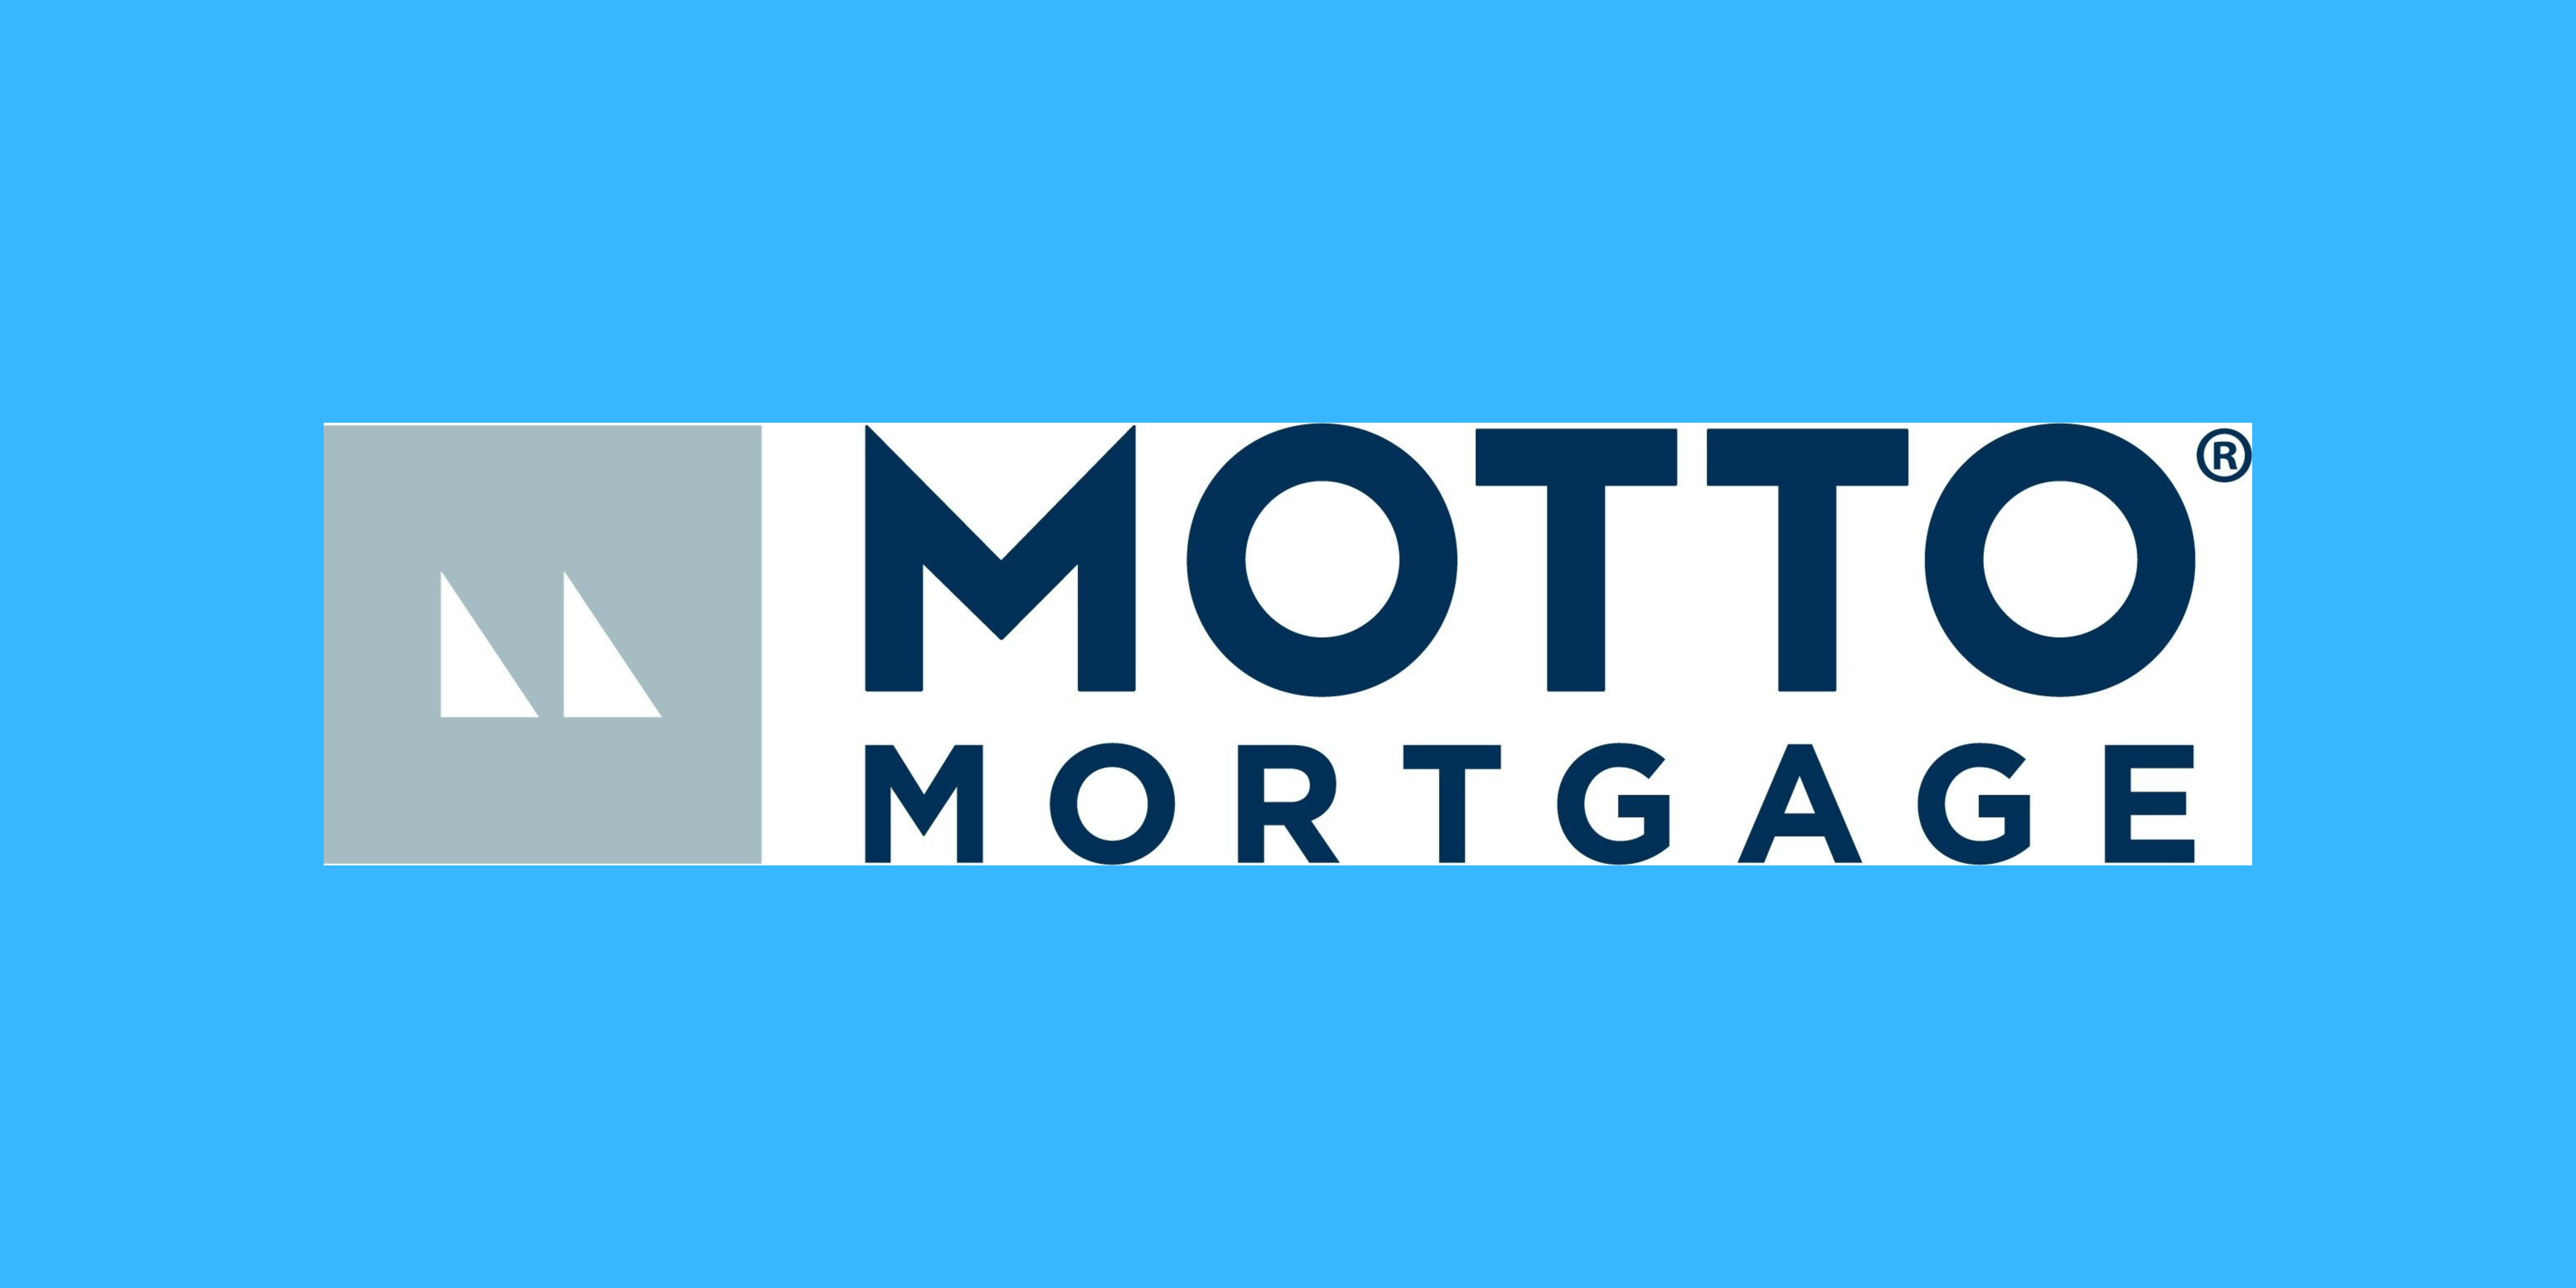 Motto Mortgage Affiliated Opens In Chicago Metro